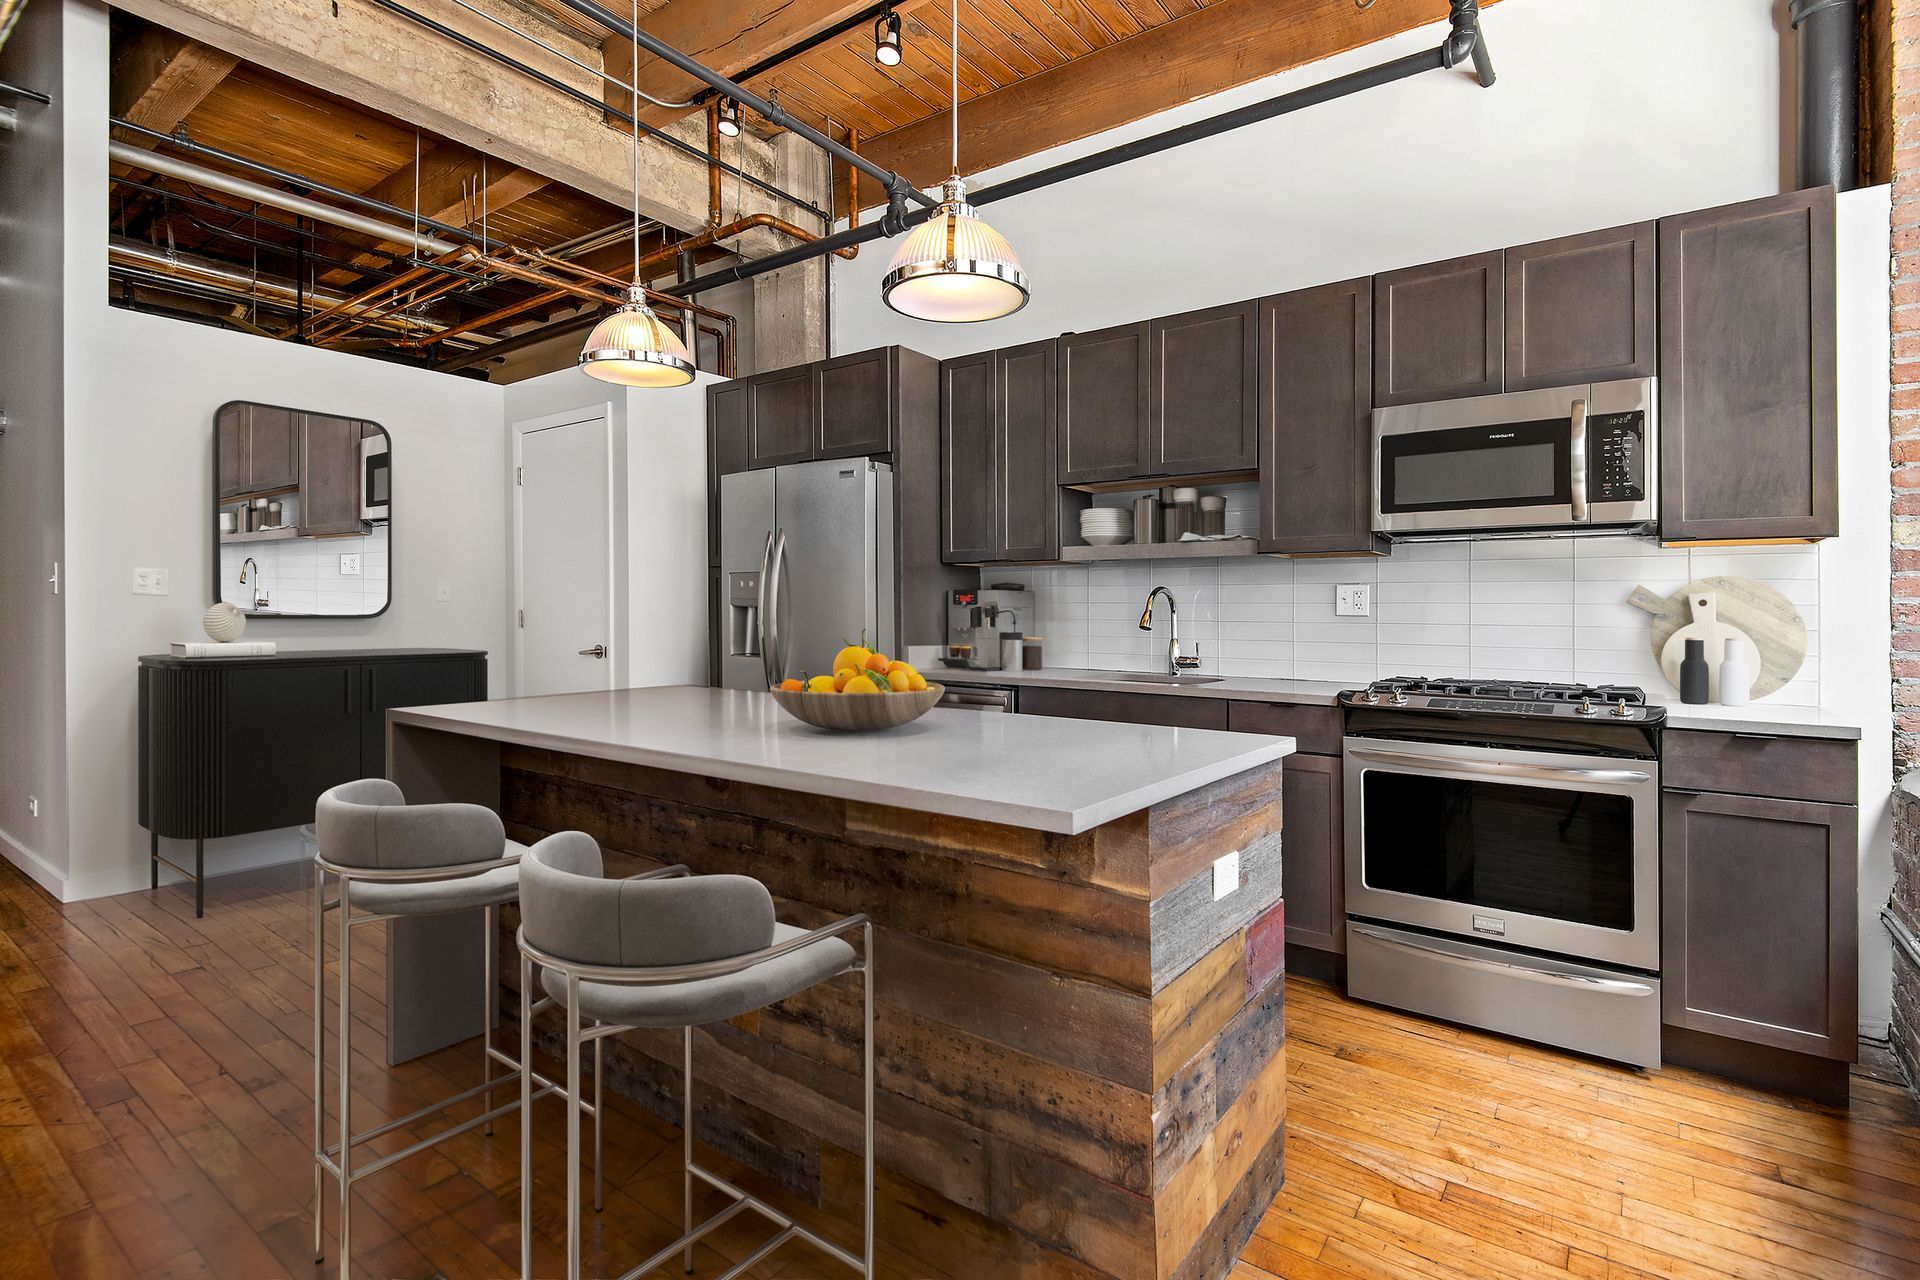 A kitchen with stainless steel appliances and wooden cabinets at The Lofts at Gin Alley.